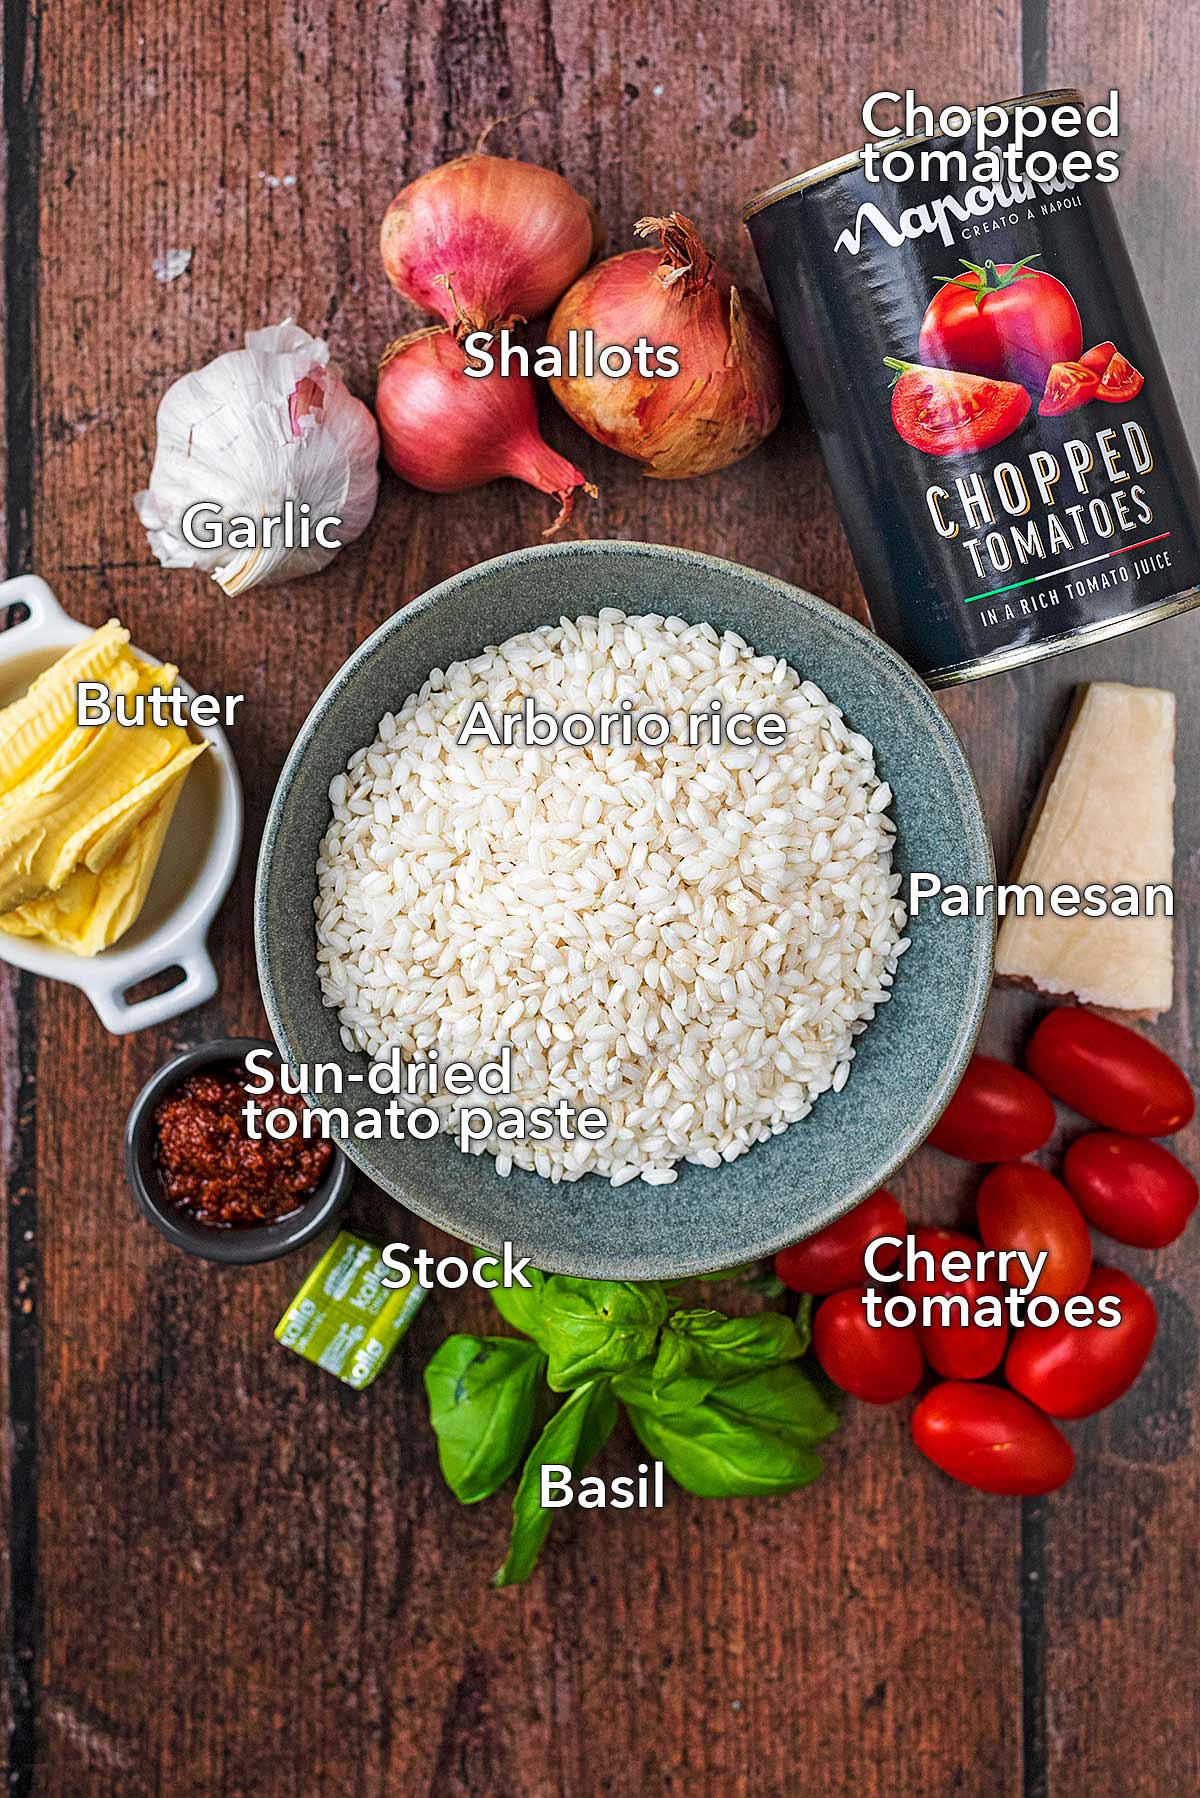 All the ingredients needed to make this recipe laid out on a wooden surface.